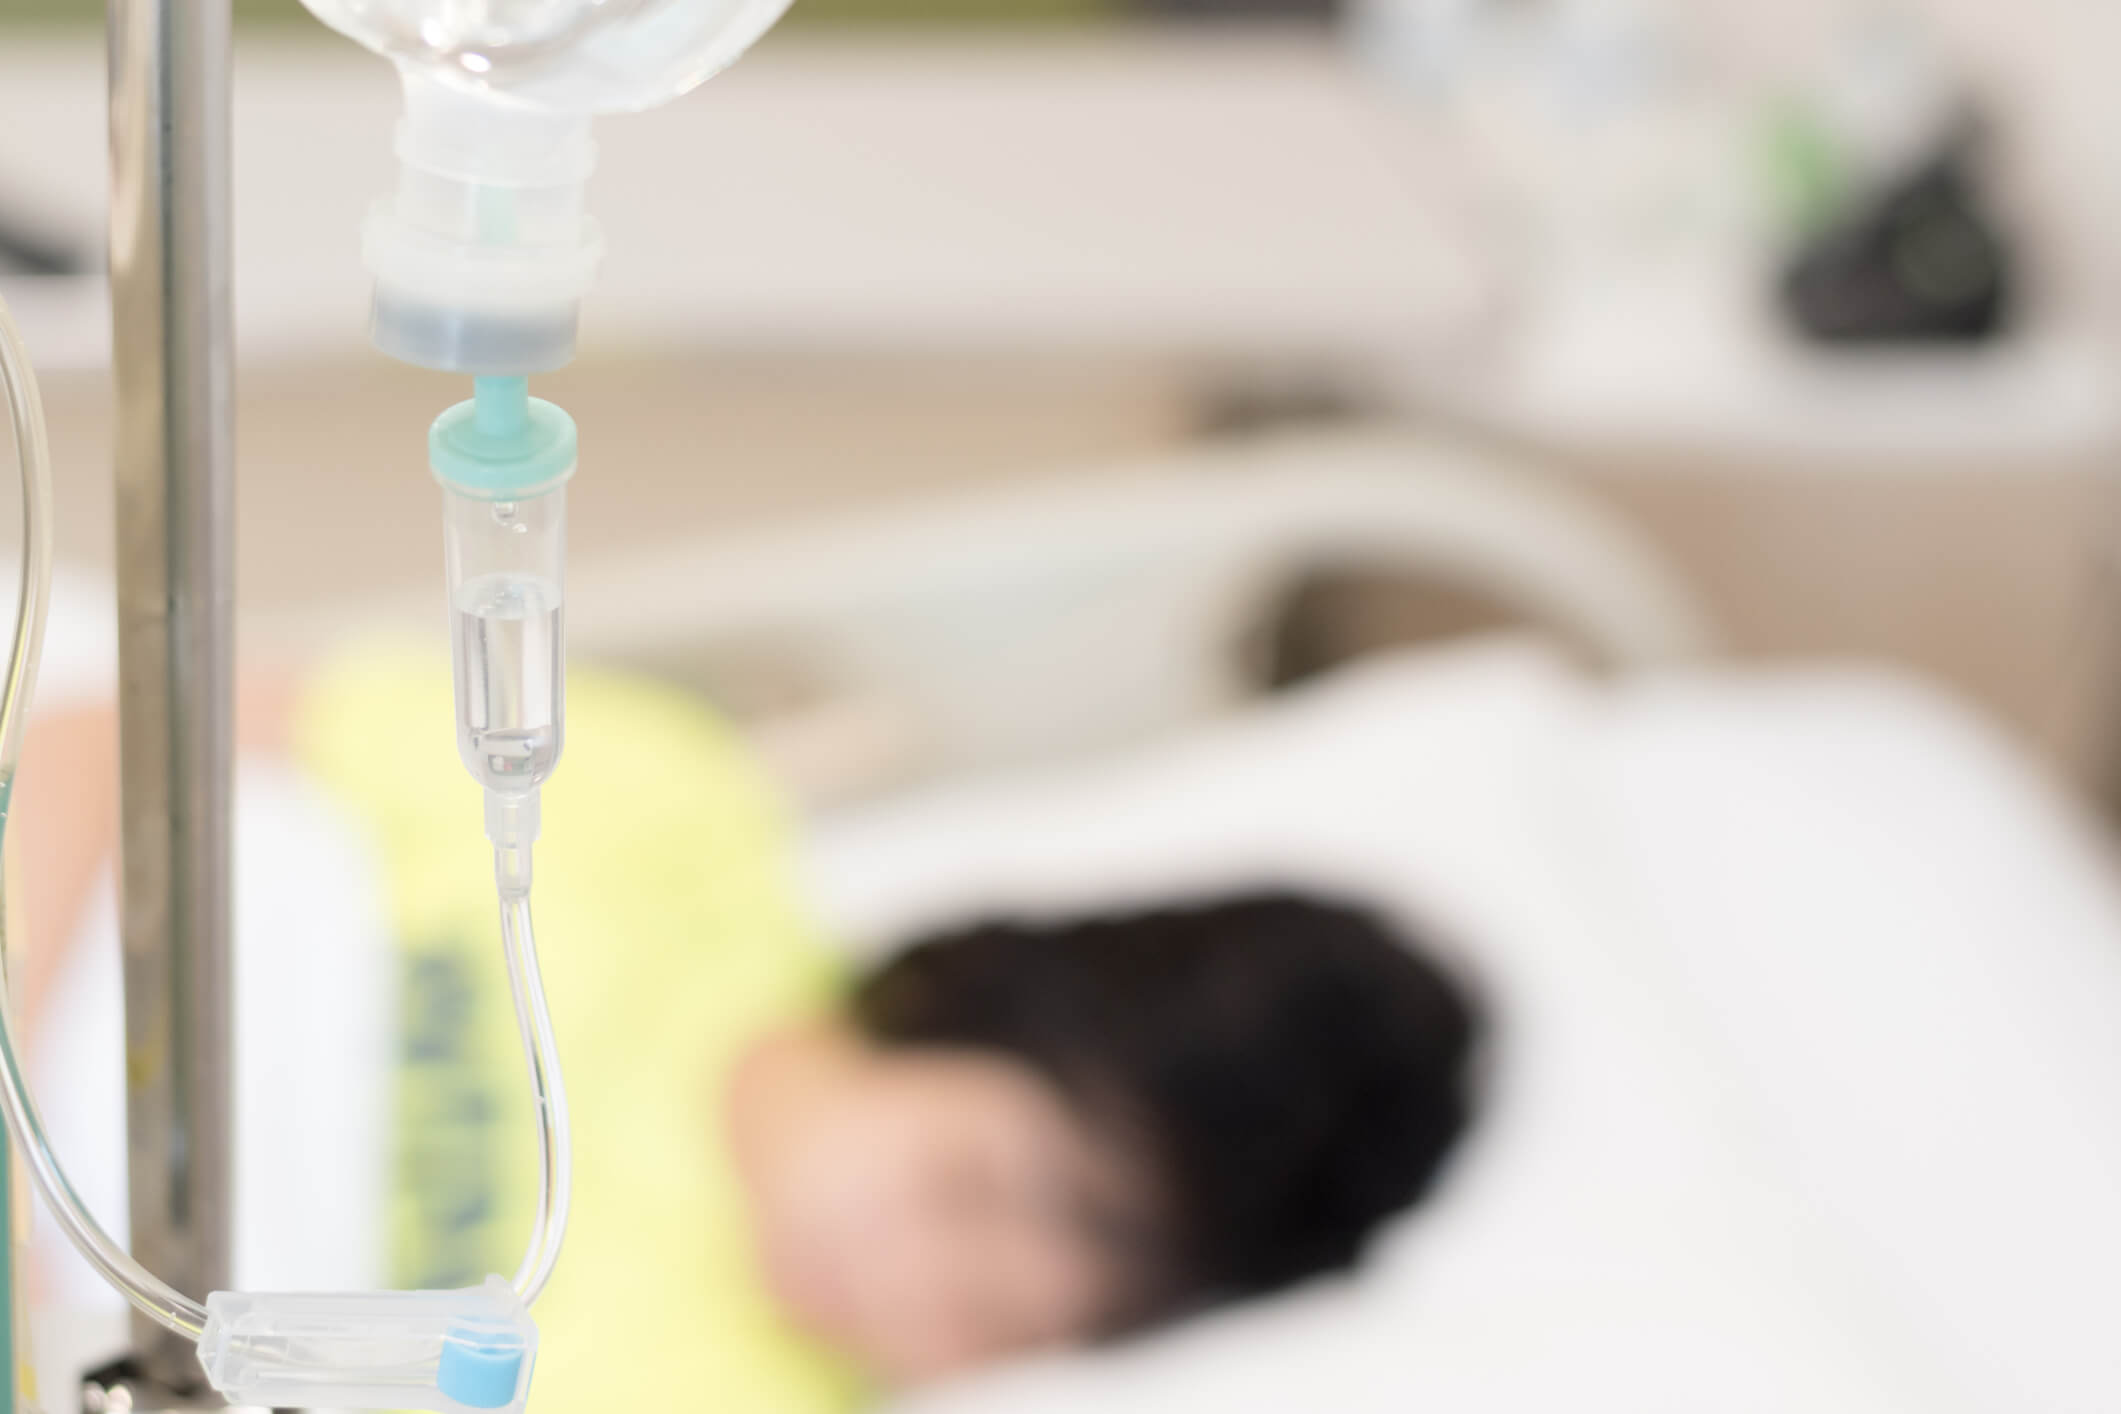 Child patient on hospital bed with IV drip.